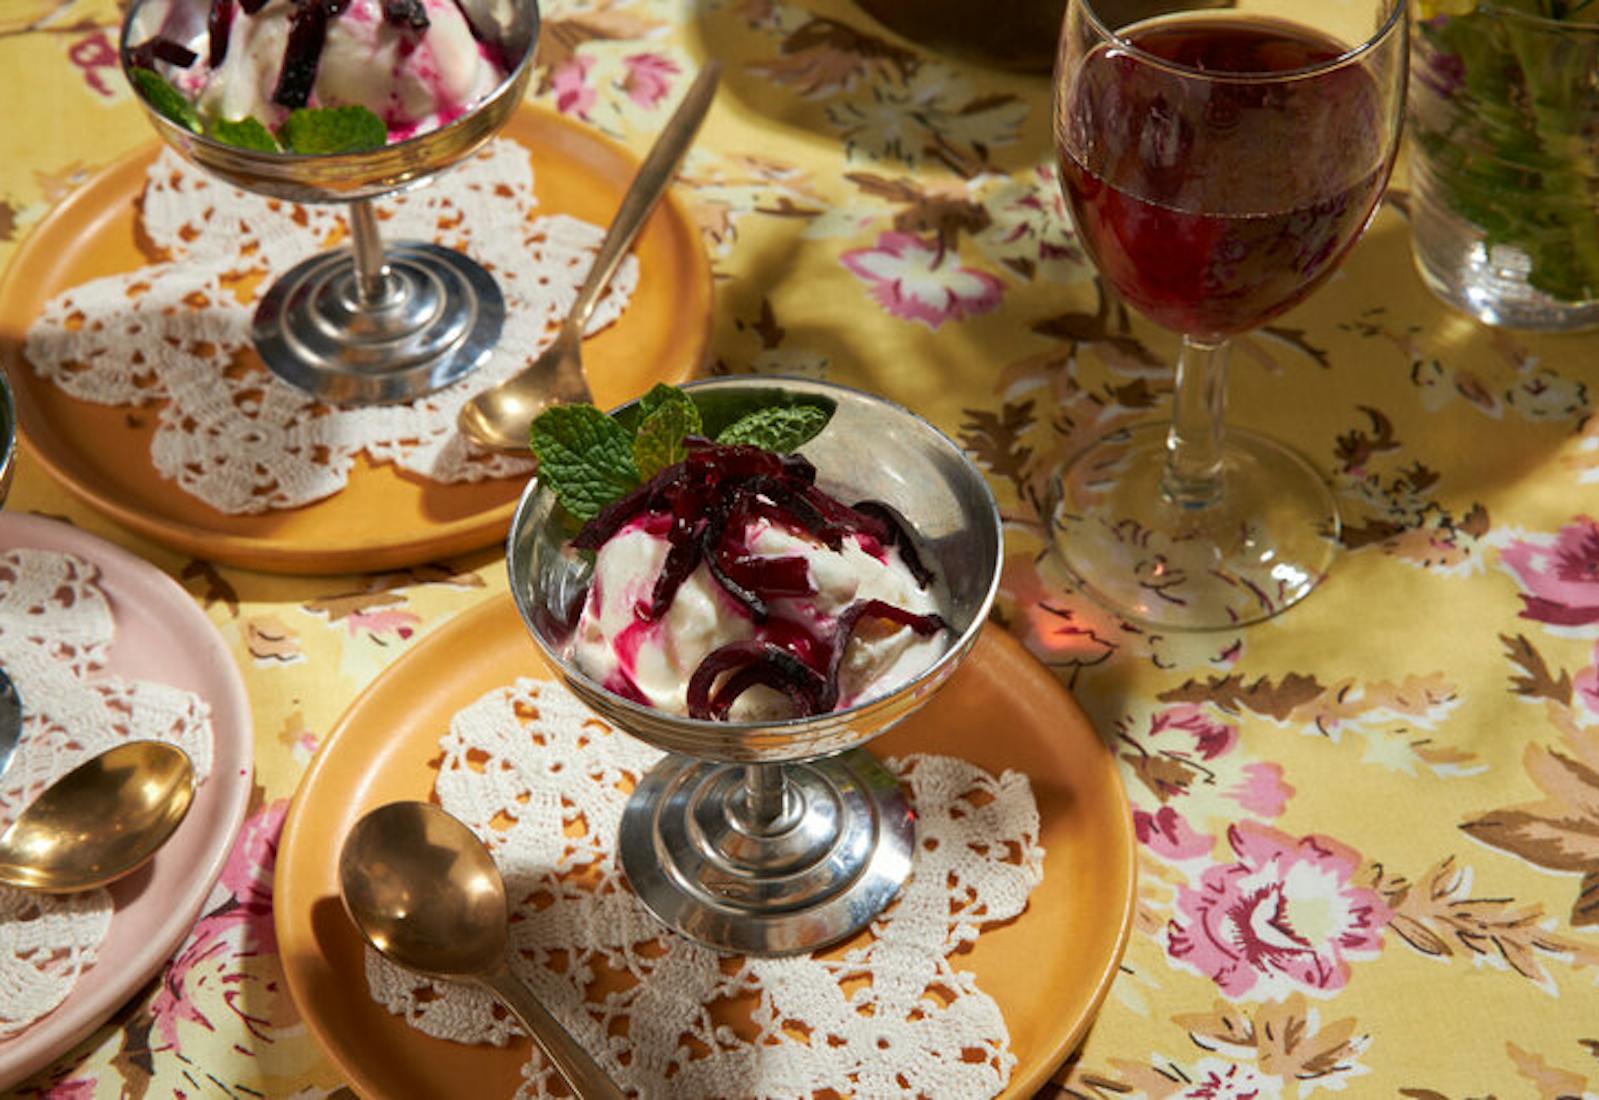 Ice cream with beets and mint in metal coupes, red wine atop yellow floral tablecloth.